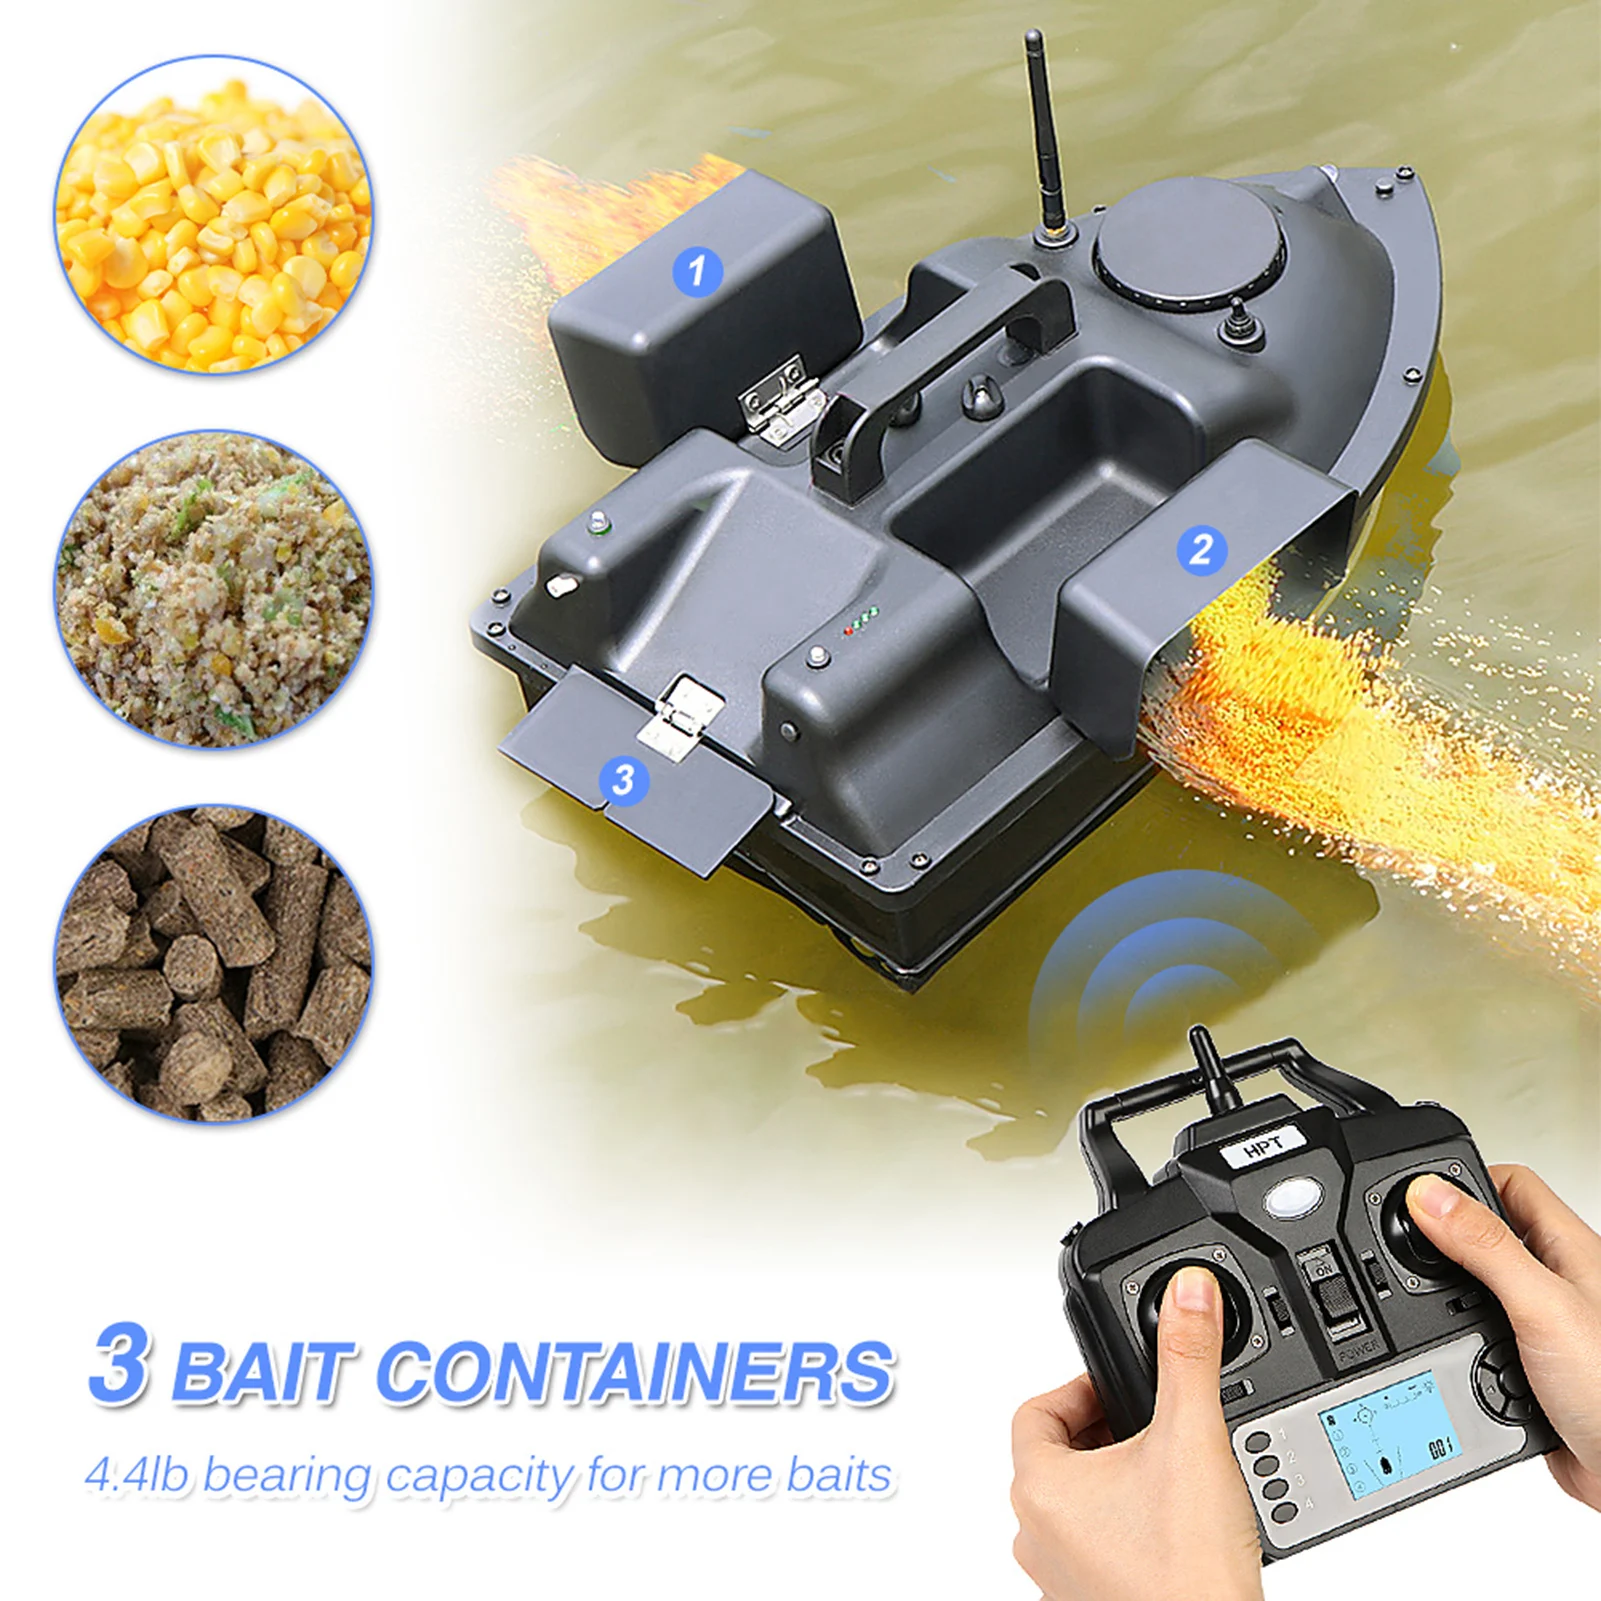 

12000mAh GPS Fishing Bait Boat with 3 Bait Containers Wireless Bait Boat with Automatic Return Function